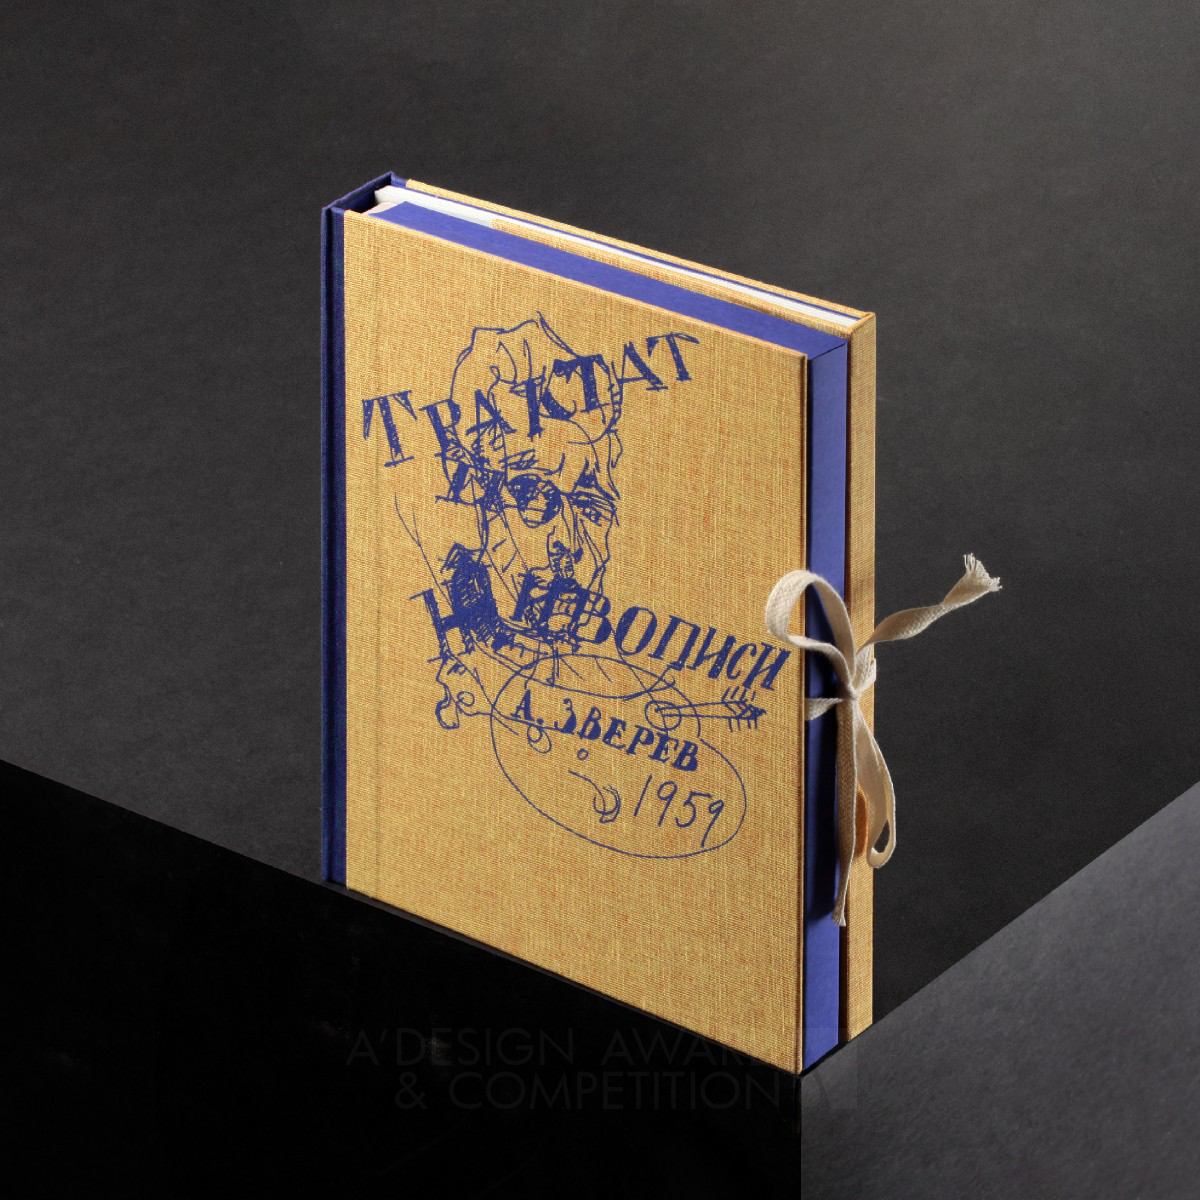 Dmitry Mordvintsev wins Bronze at the prestigious A' Graphics, Illustration and Visual Communication Design Award with Treatise on Painting Book.